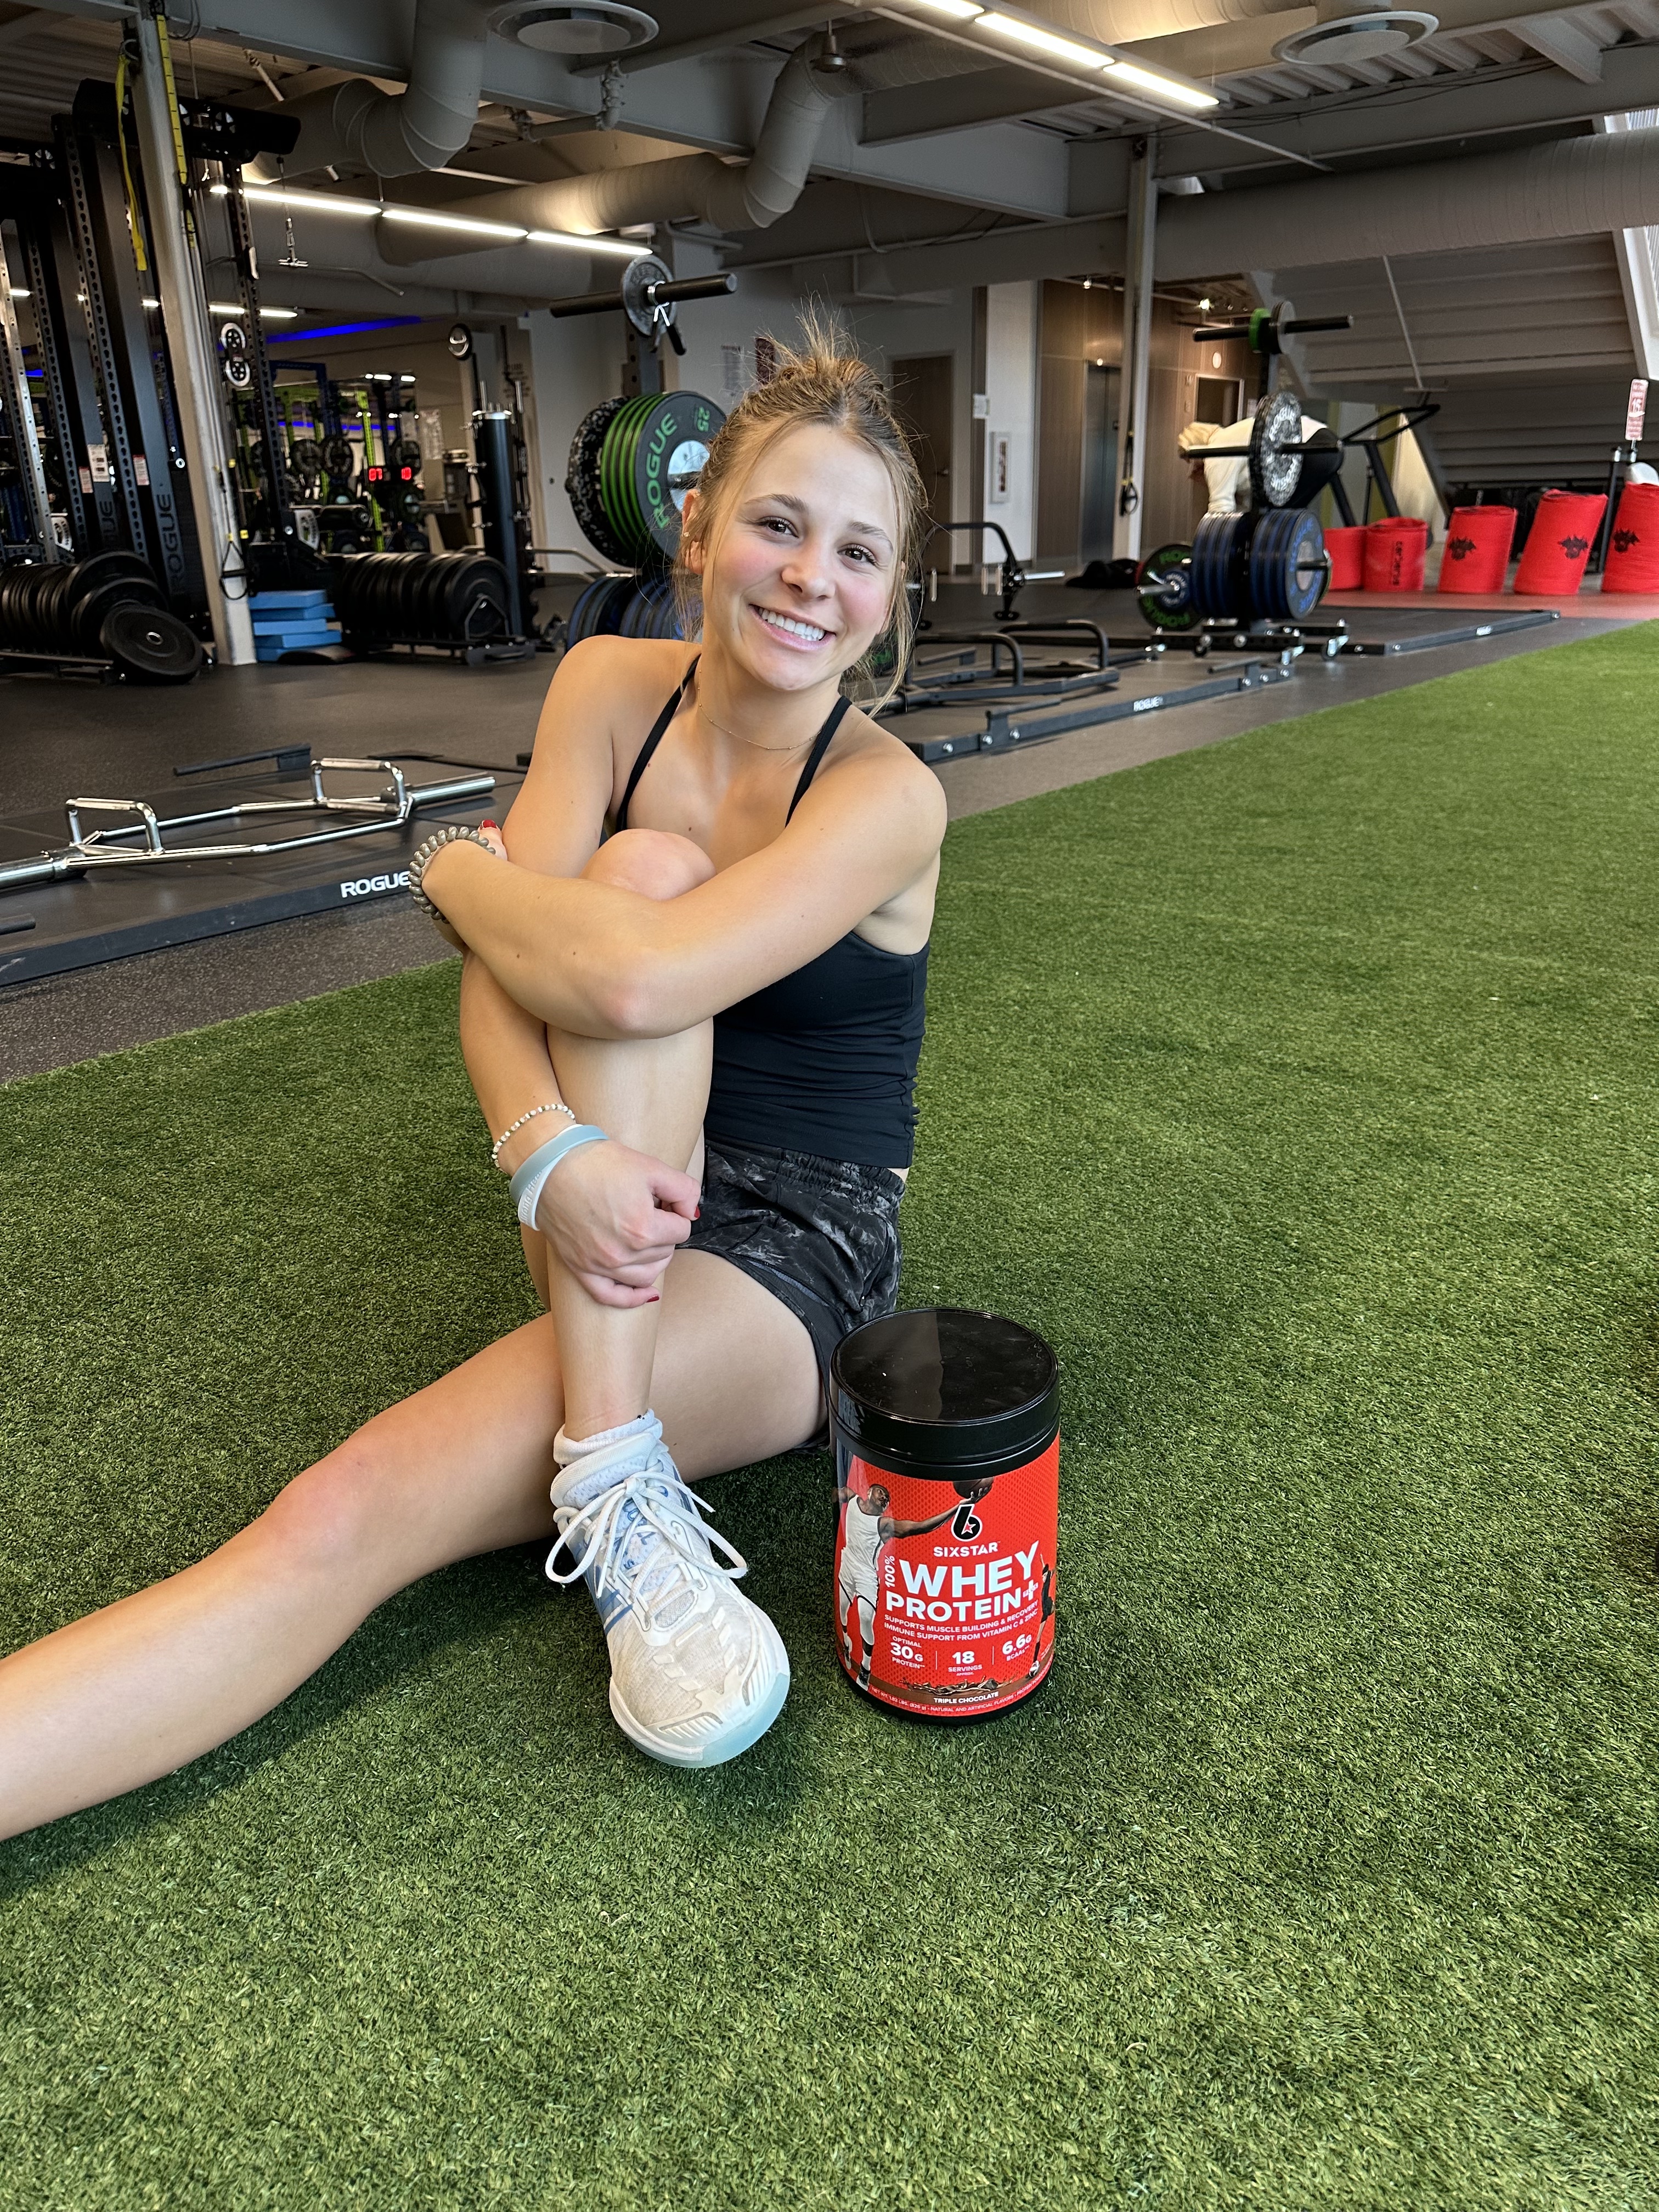 Anna Frey, who has spent the 2023 Pro Football Season as a TikTok® sensation due to her similar likeness to the San Francisco starting quarterback, has inked a Name, Image and Likeness deal of her own with Six Star Pro Nutrition®, America’s #1 selling Sports Nutrition brand1, who will fulfill her prophecy of attending “The Big Game” with a signing bonus that includes tickets, travel and hospitality in Las Vegas.